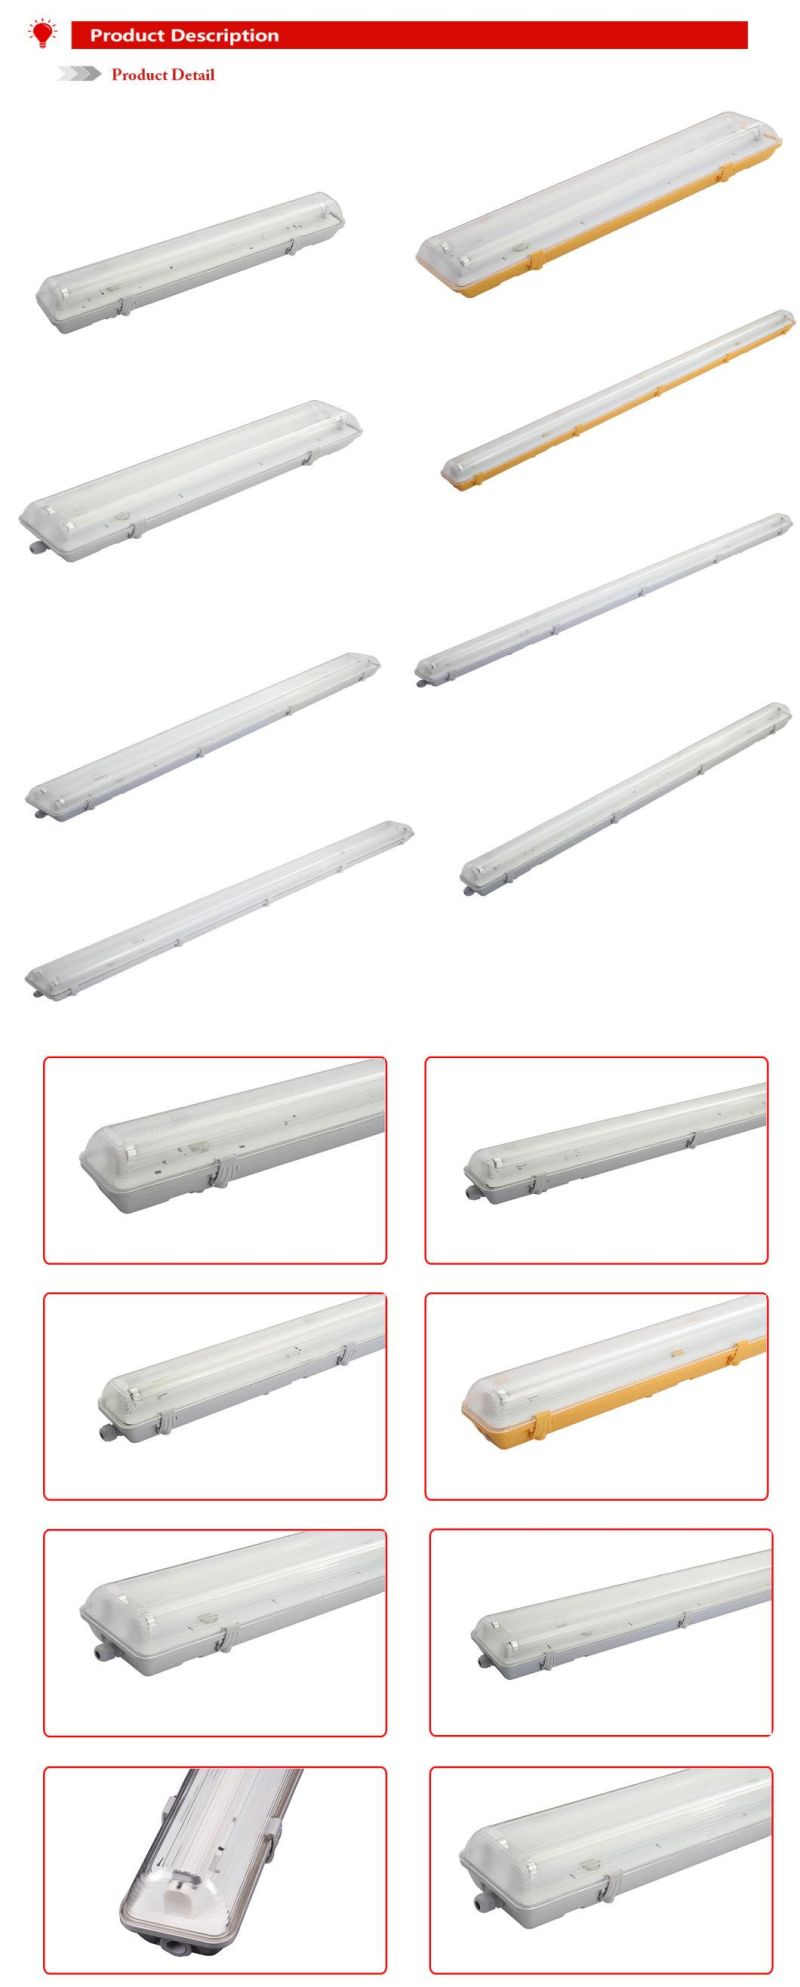 IP65 Waterproof Fixture for Fluorescent Lamp or LED Tube